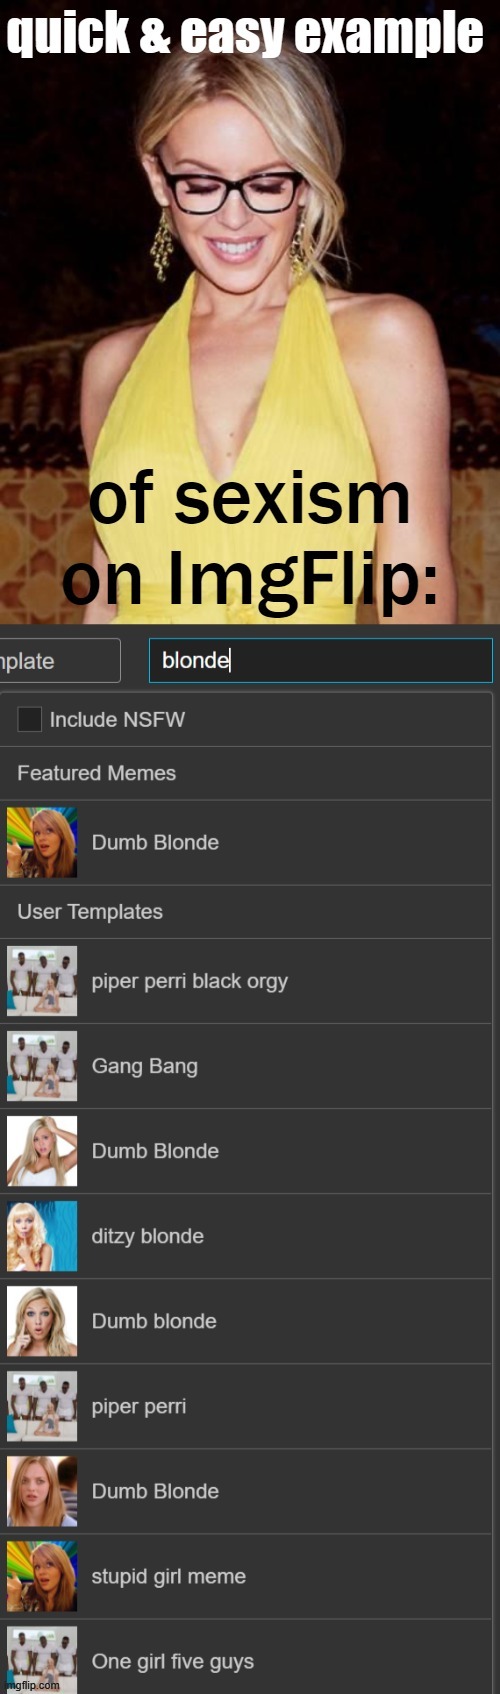 what are the most popular memes for "blonde" on ImgFlip? | image tagged in blonde,dumb blonde,sexism,sexist,memes about memes,memes about memeing | made w/ Imgflip meme maker